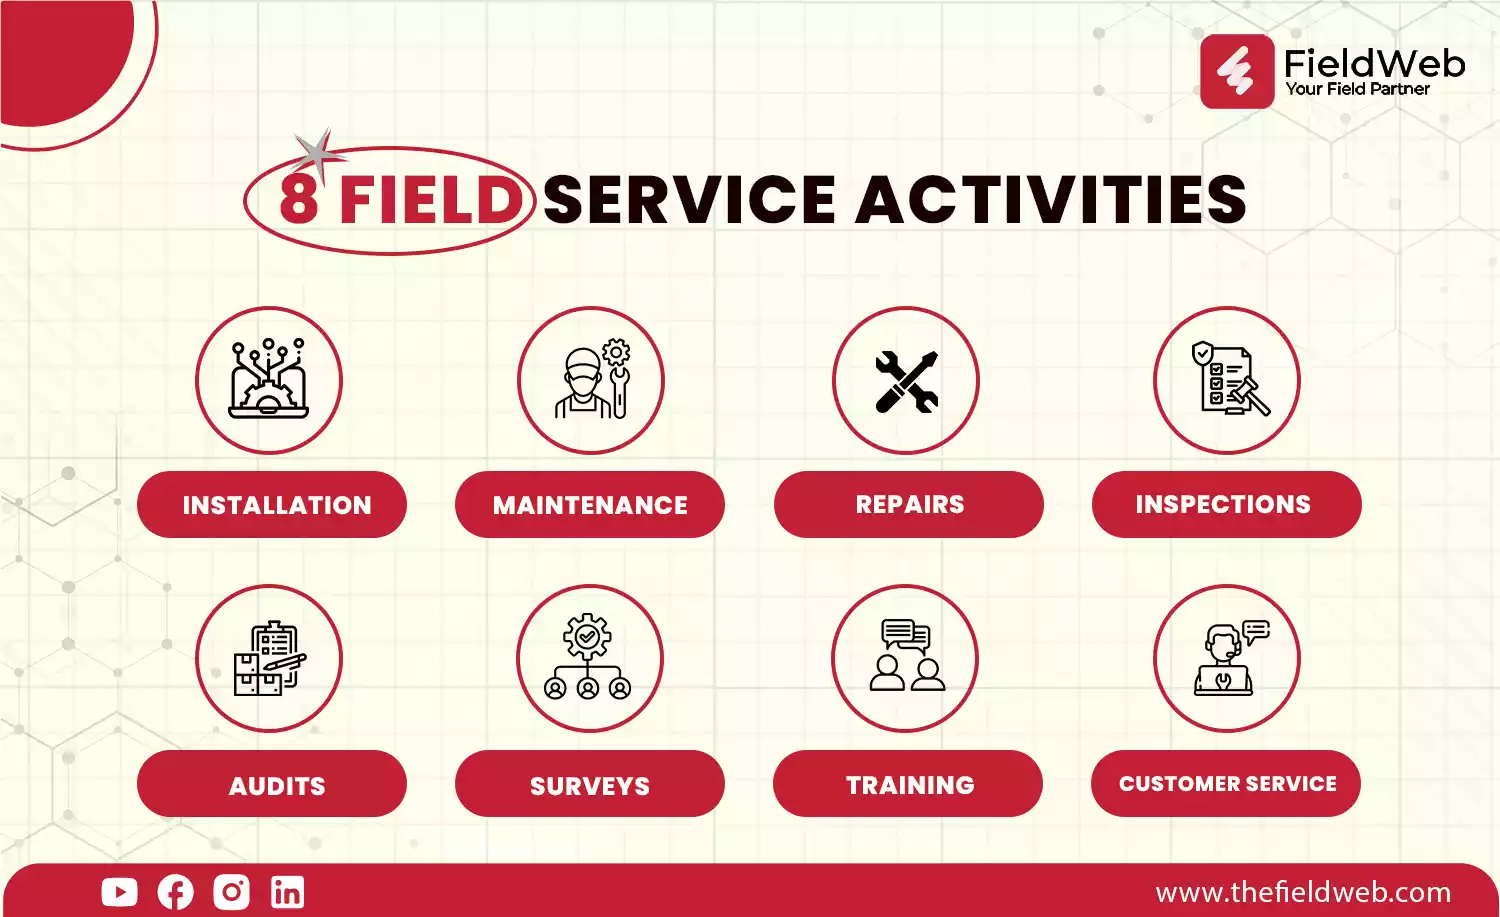 image is displaying 8 field service activities